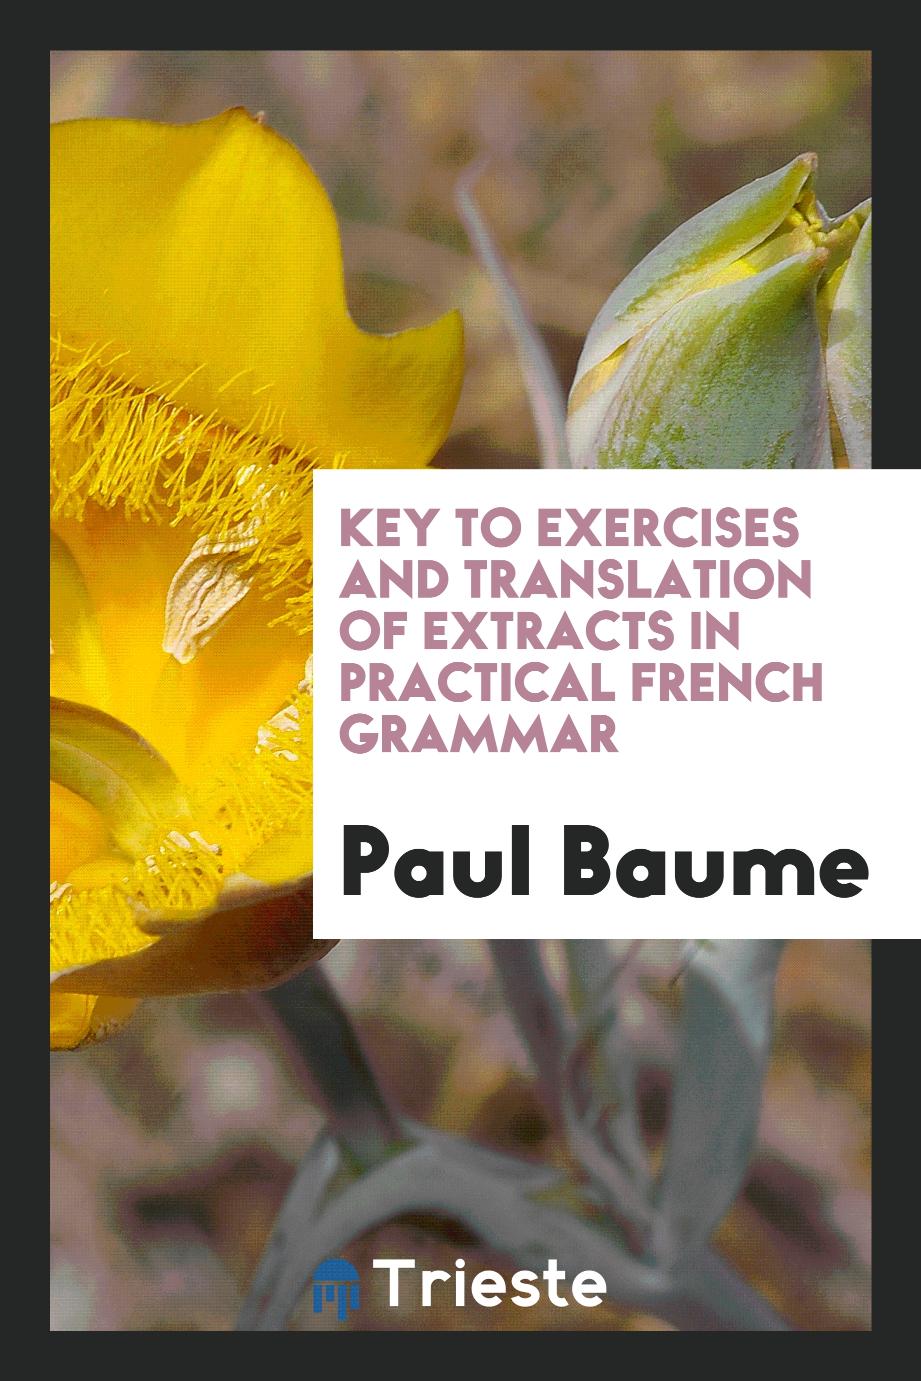 Key to exercises and translation of extracts in Practical French grammar